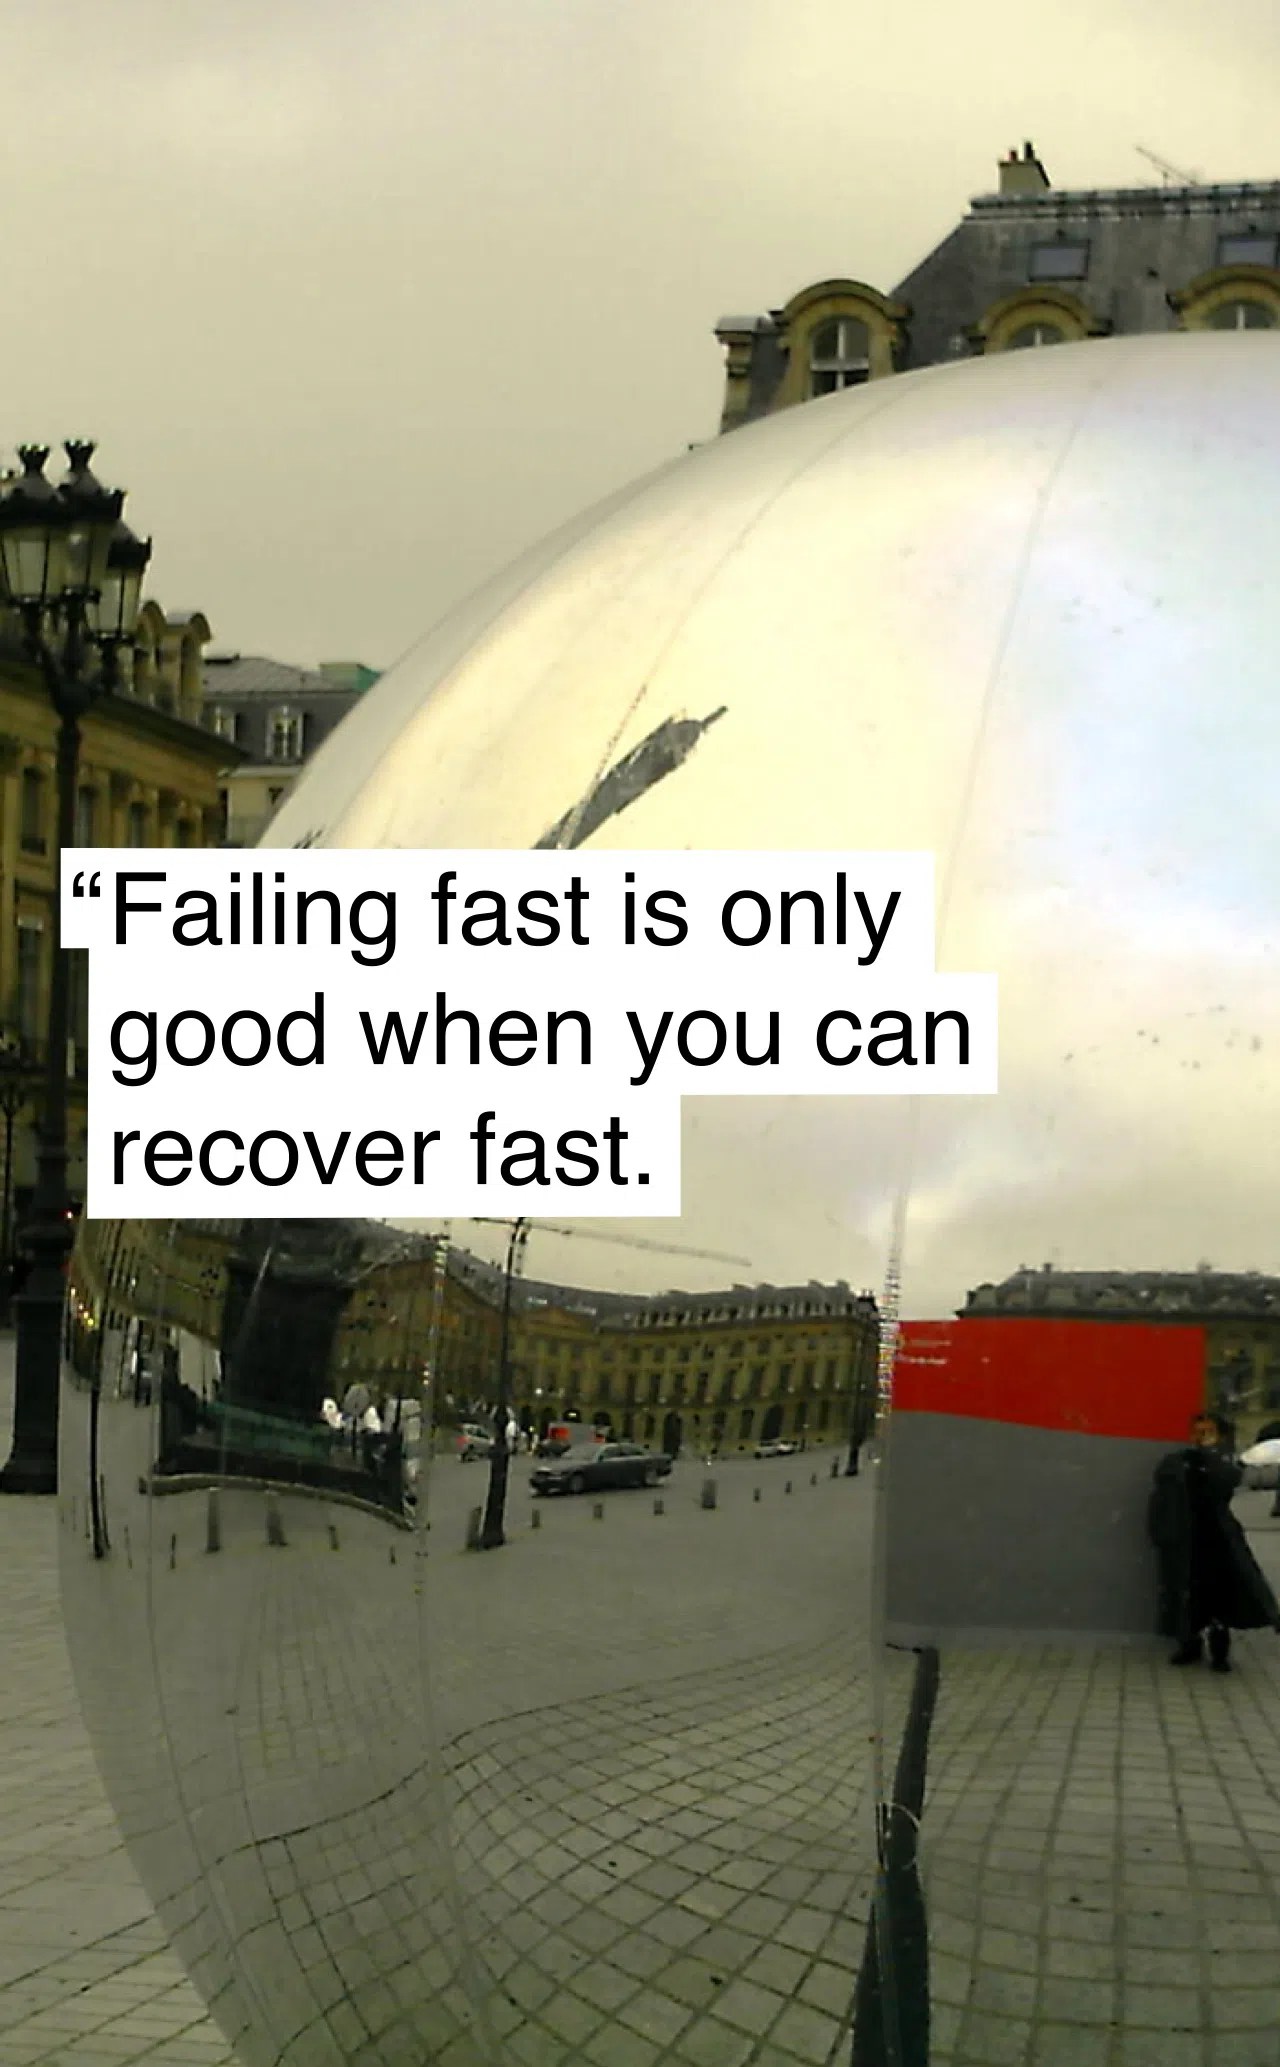 Don't fail fast. Recover fast.